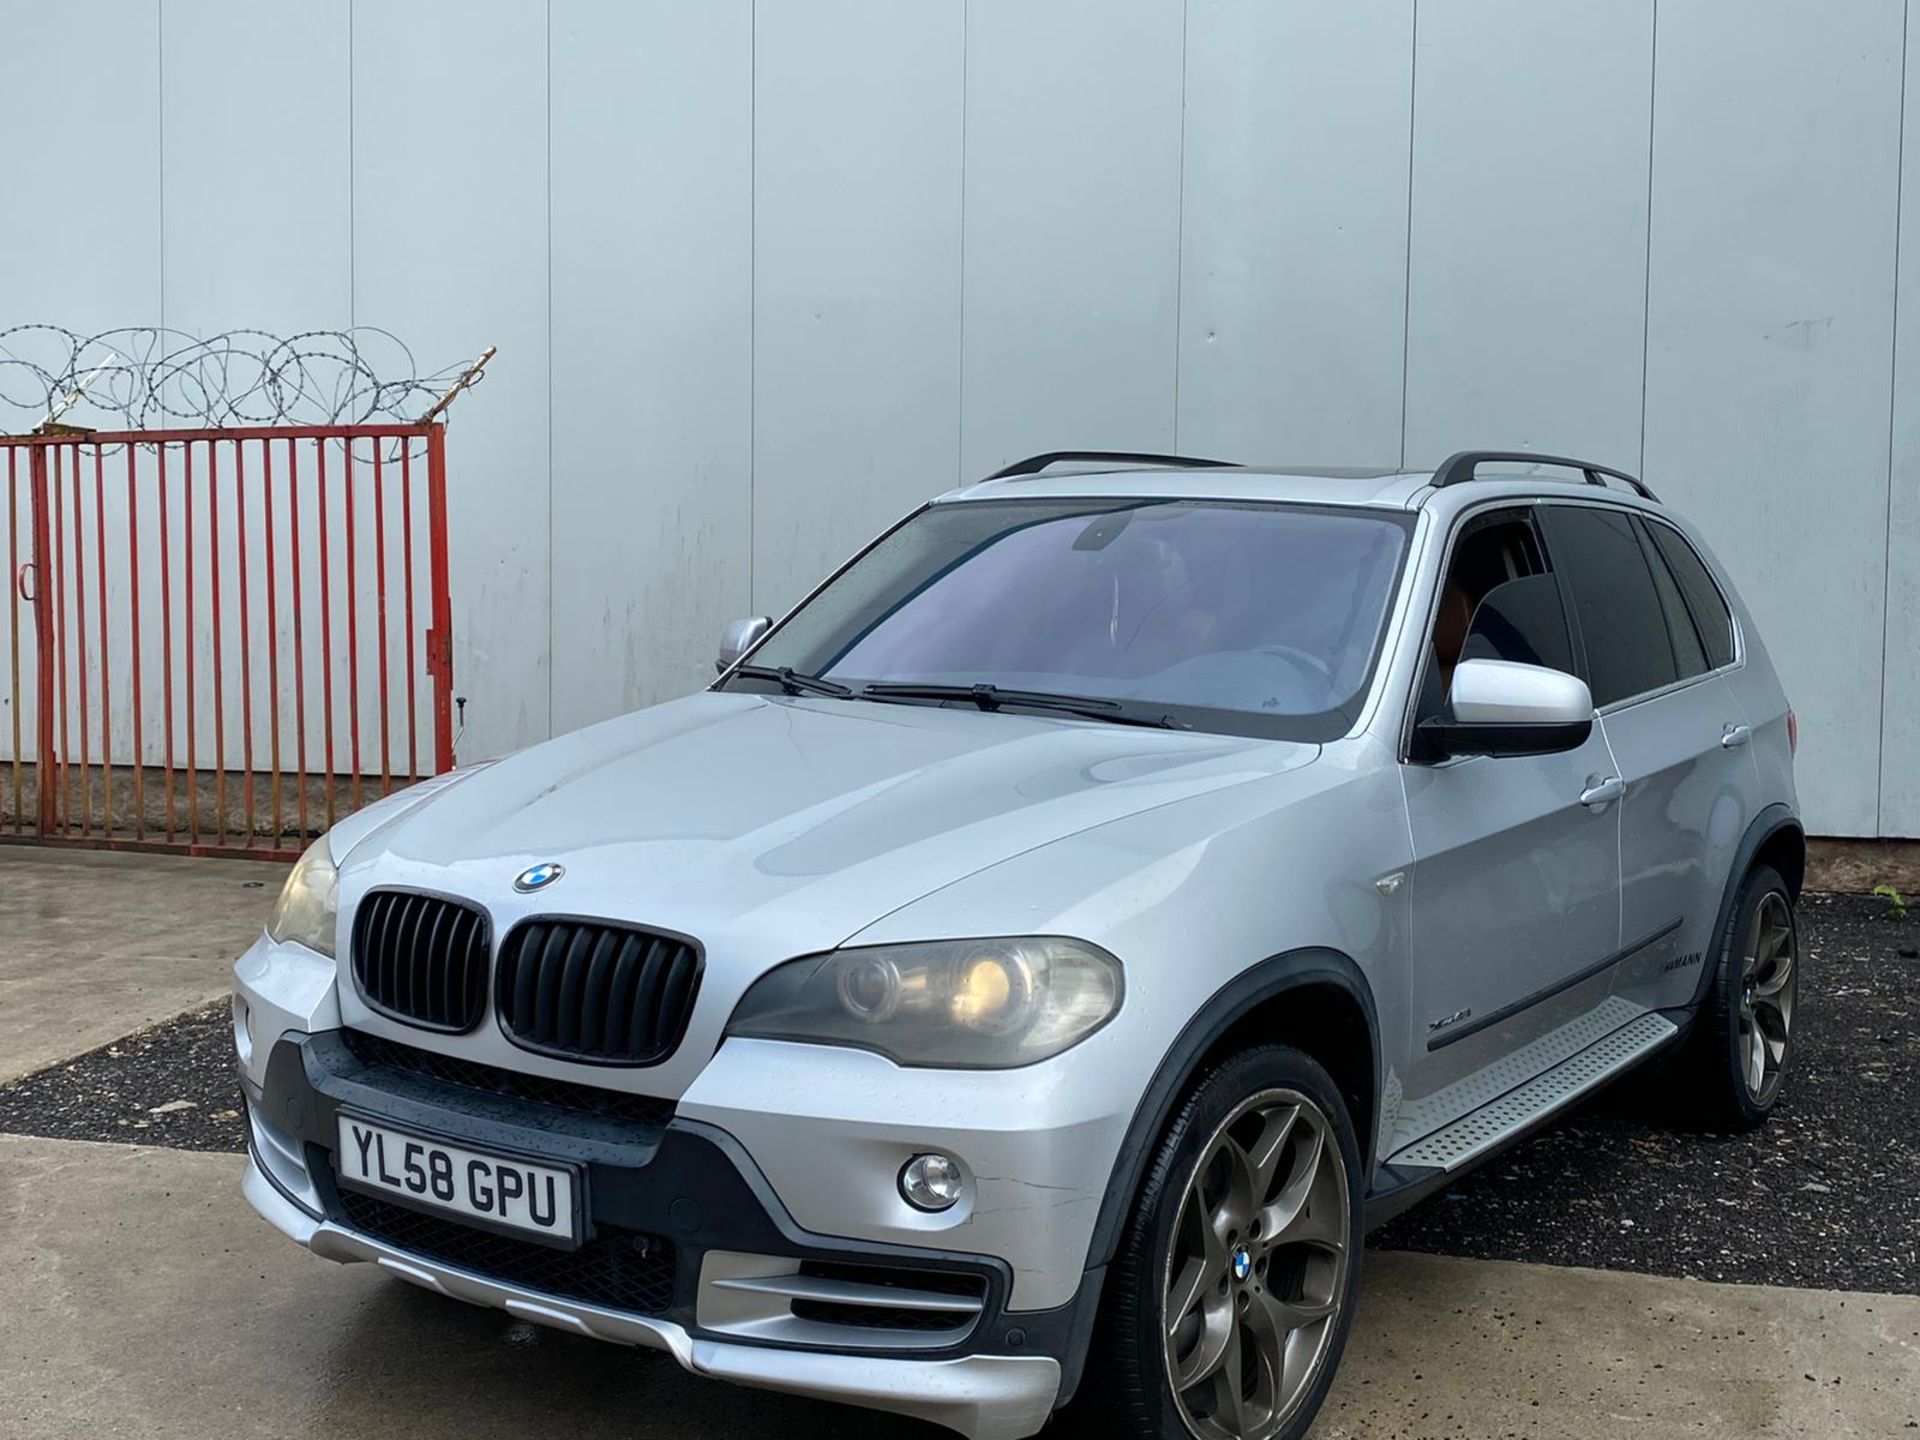 2009/58 REG BMW X5 4.8L PETROL AUTOMATIC SILVER, SHOWING 1 FORMER KEEPER - LEFT HAND DRIVE *NO VAT* - Image 3 of 12